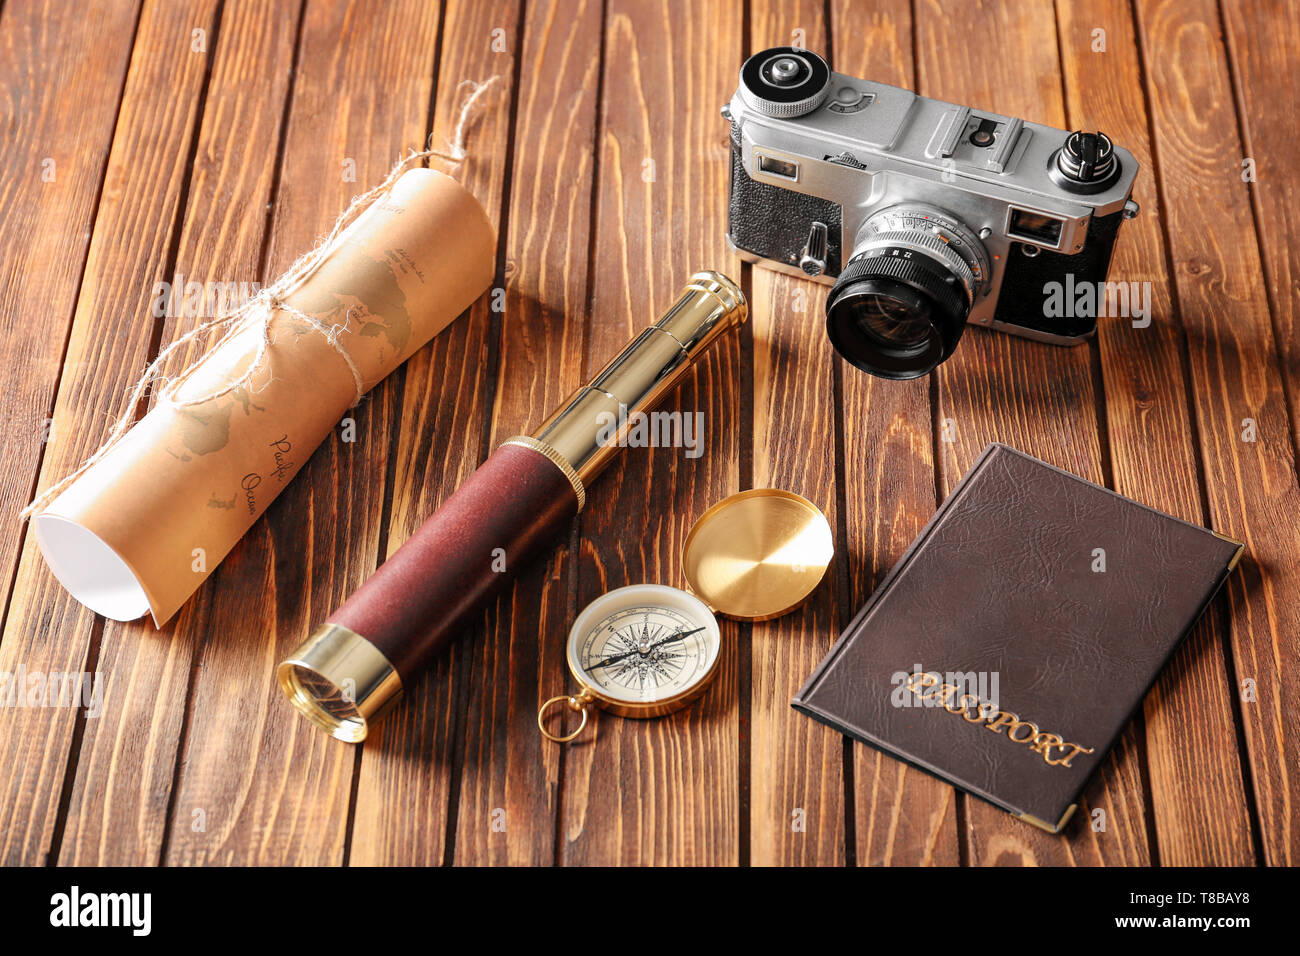 Vintage compass with spyglass, passport, map and photo camera on wooden table Stock Photo